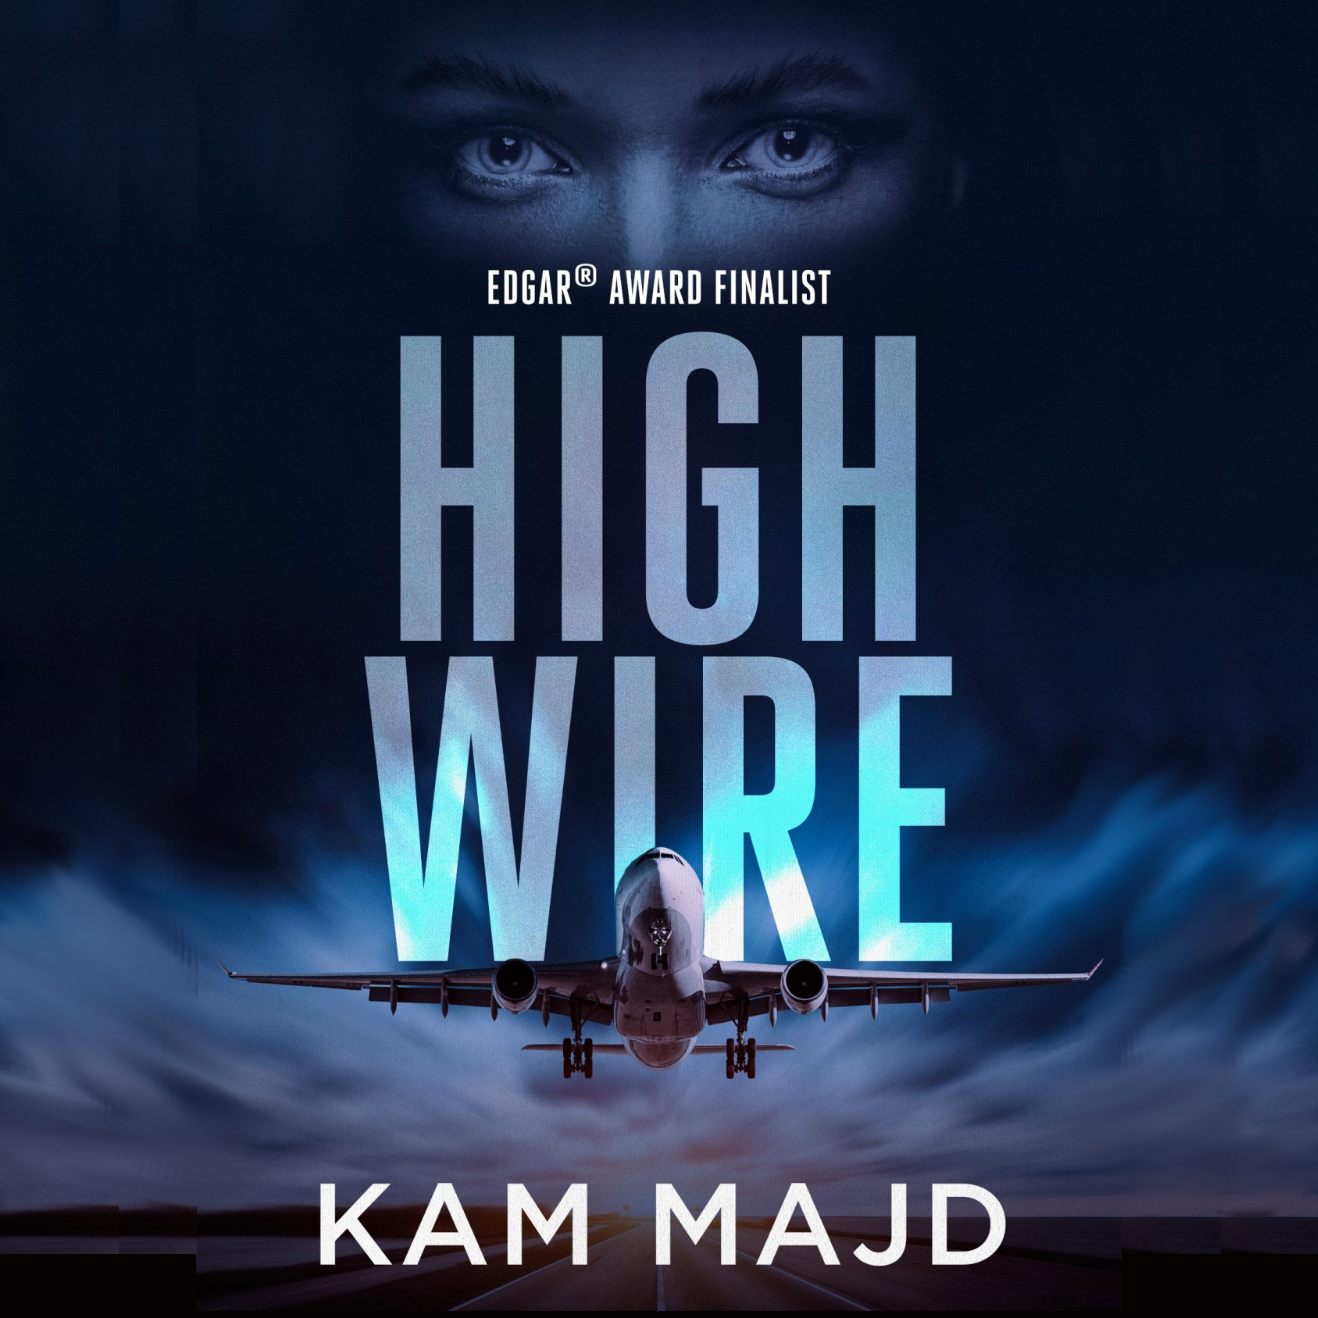 Cover of Kam's Book "High Wire"